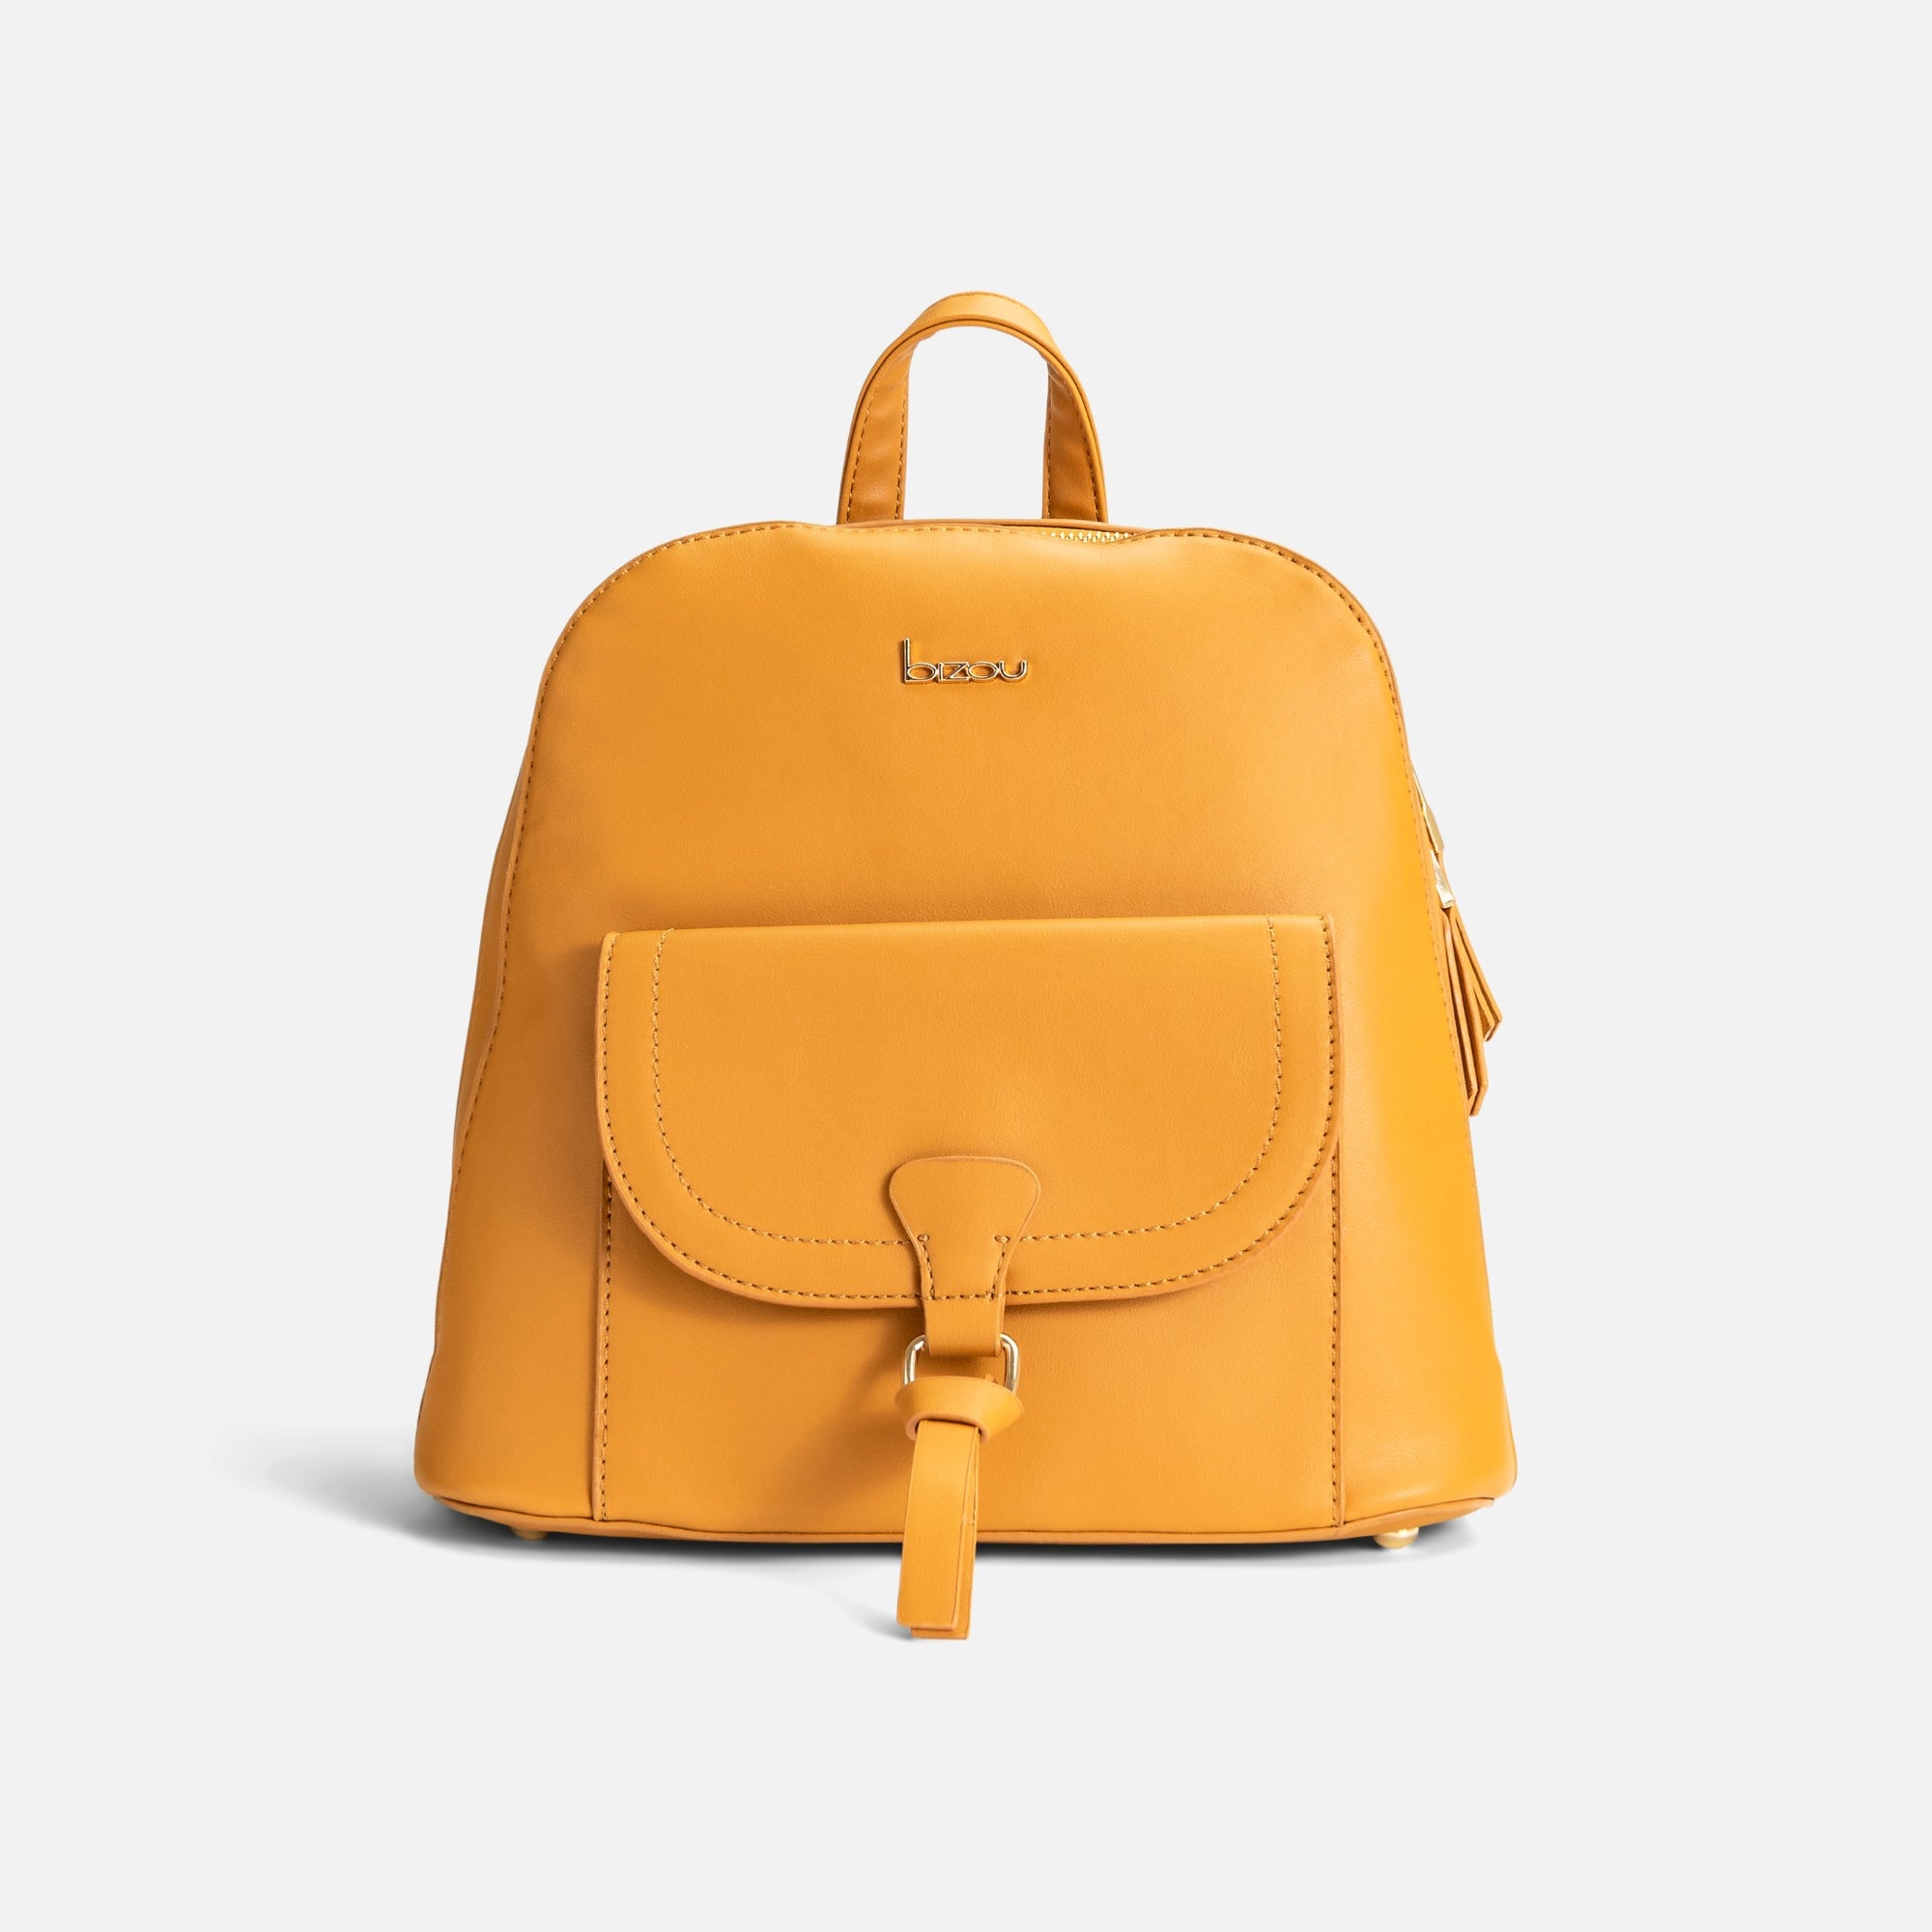 Ochre yellow backpack with front pocket